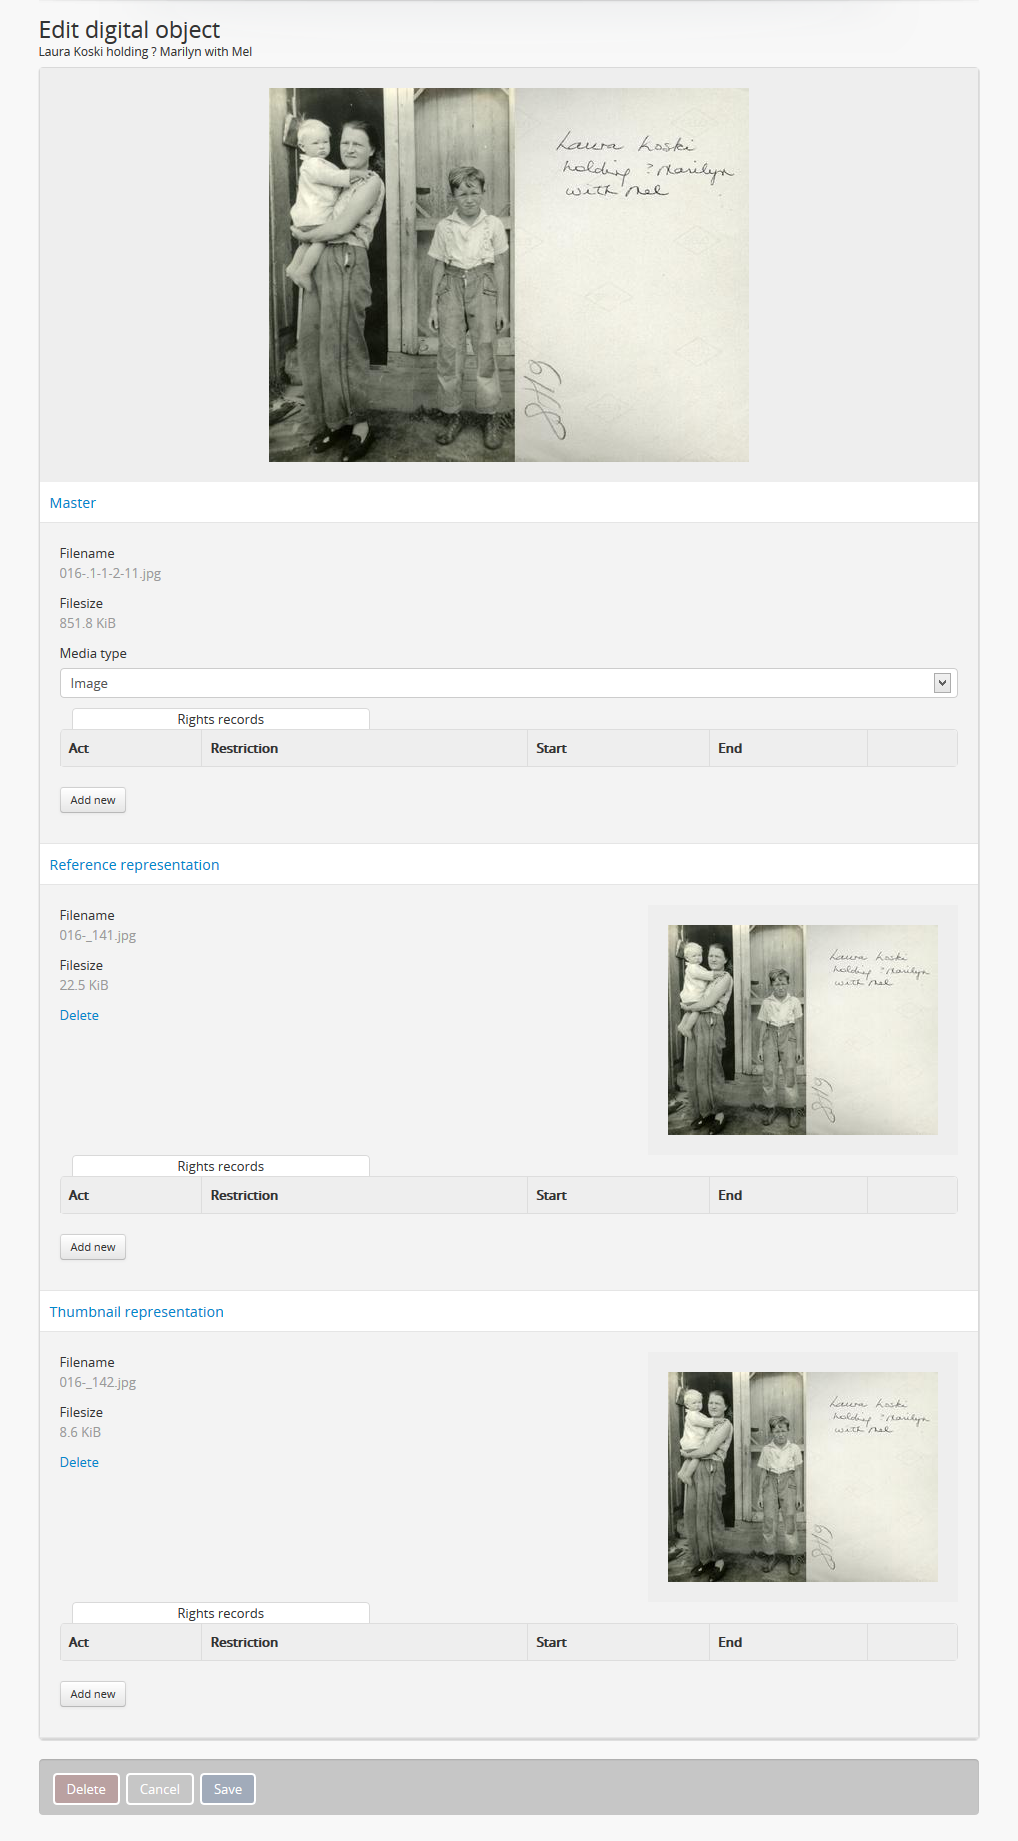 Example of the edit digital object page